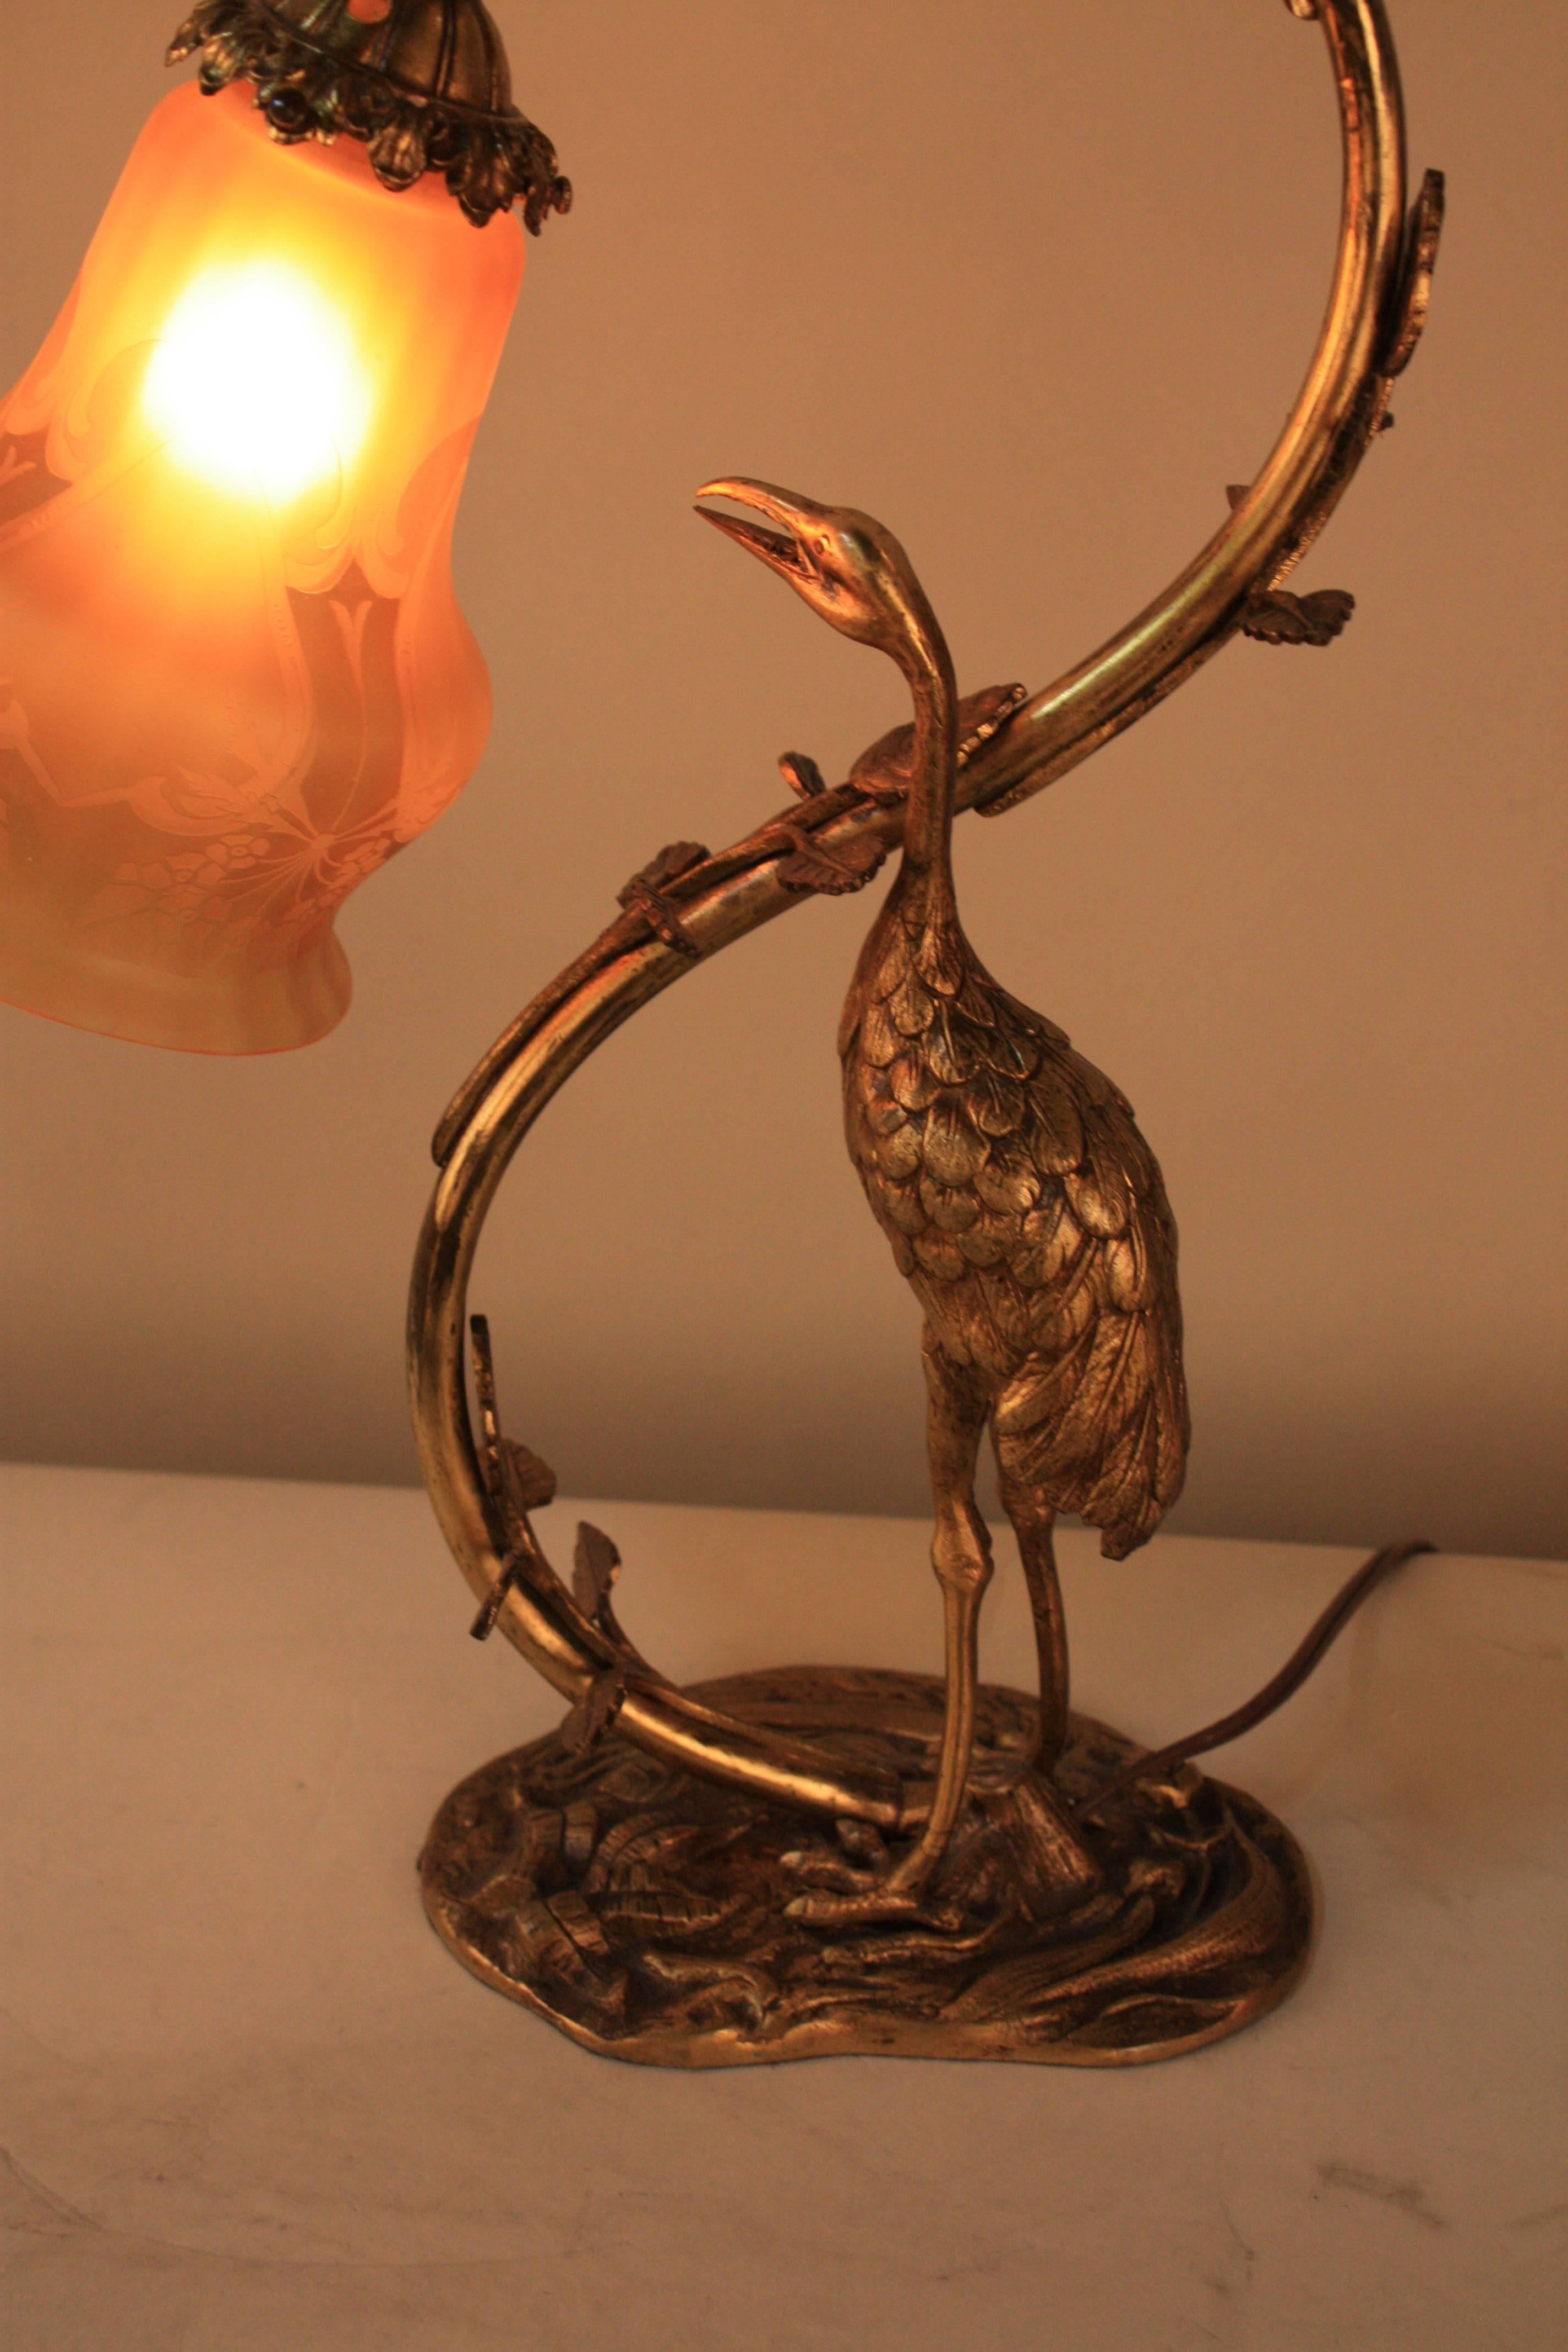 Masterfully crafted in France during the early 1900s, this beautiful bronze table lamp features an Classic organically-inspired Art Nouveau design. A wonderful sculptural stork rendering serves as this gorgeous table lamp's ornate centerpiece. A